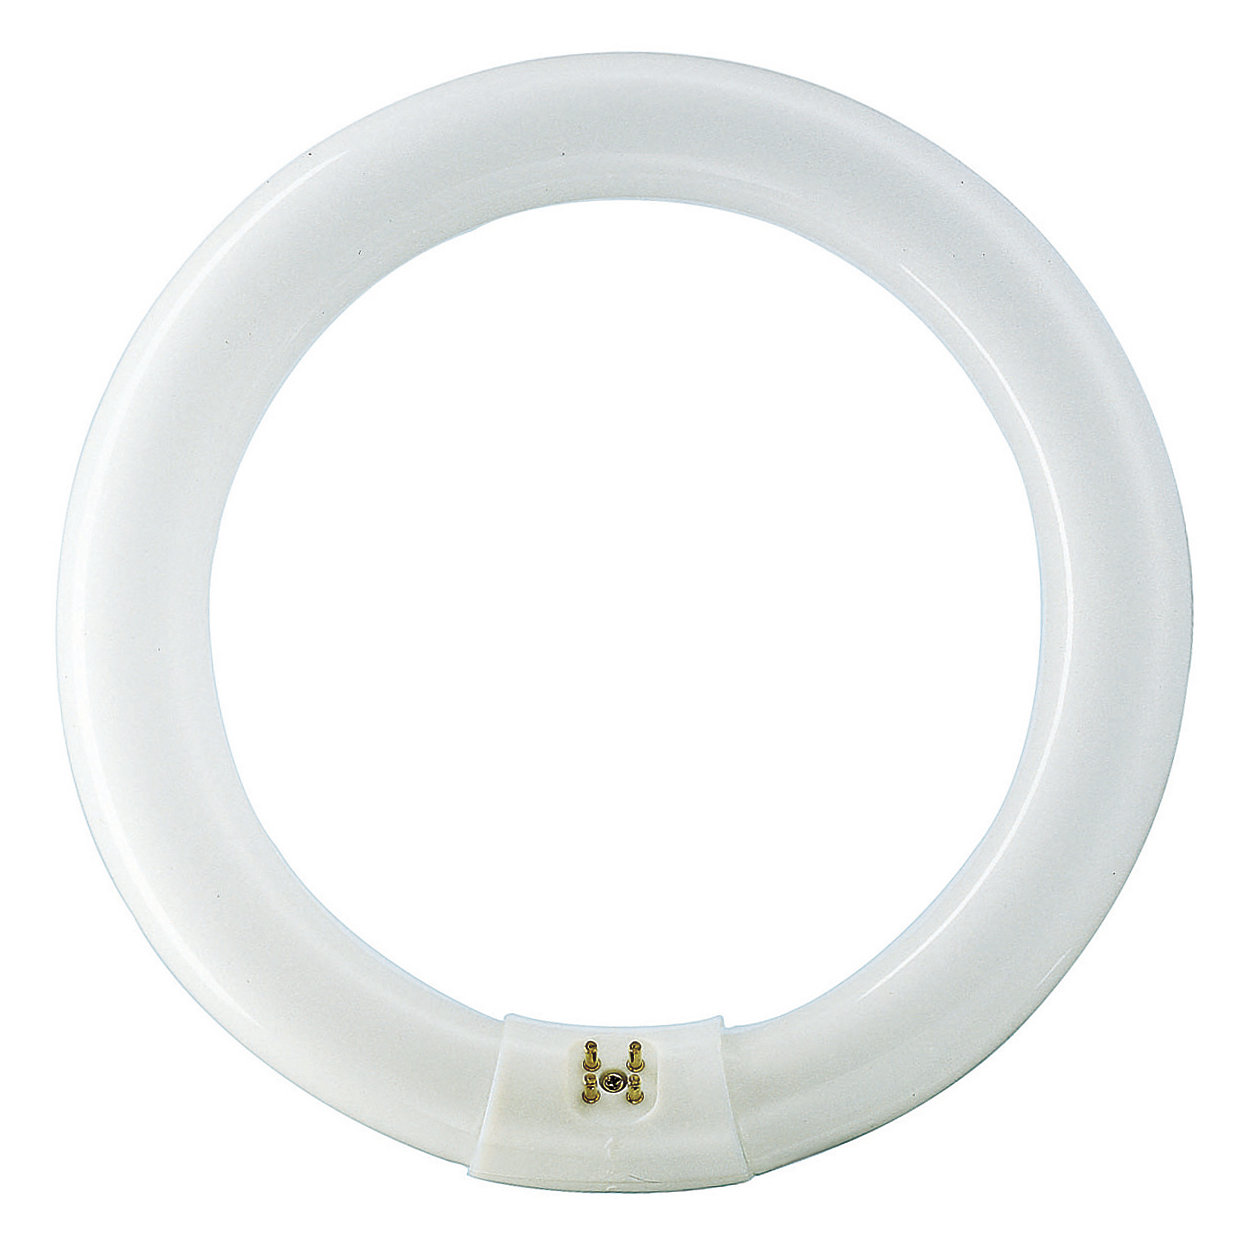 Circular shaped fluorescent lighting with improved color rendering